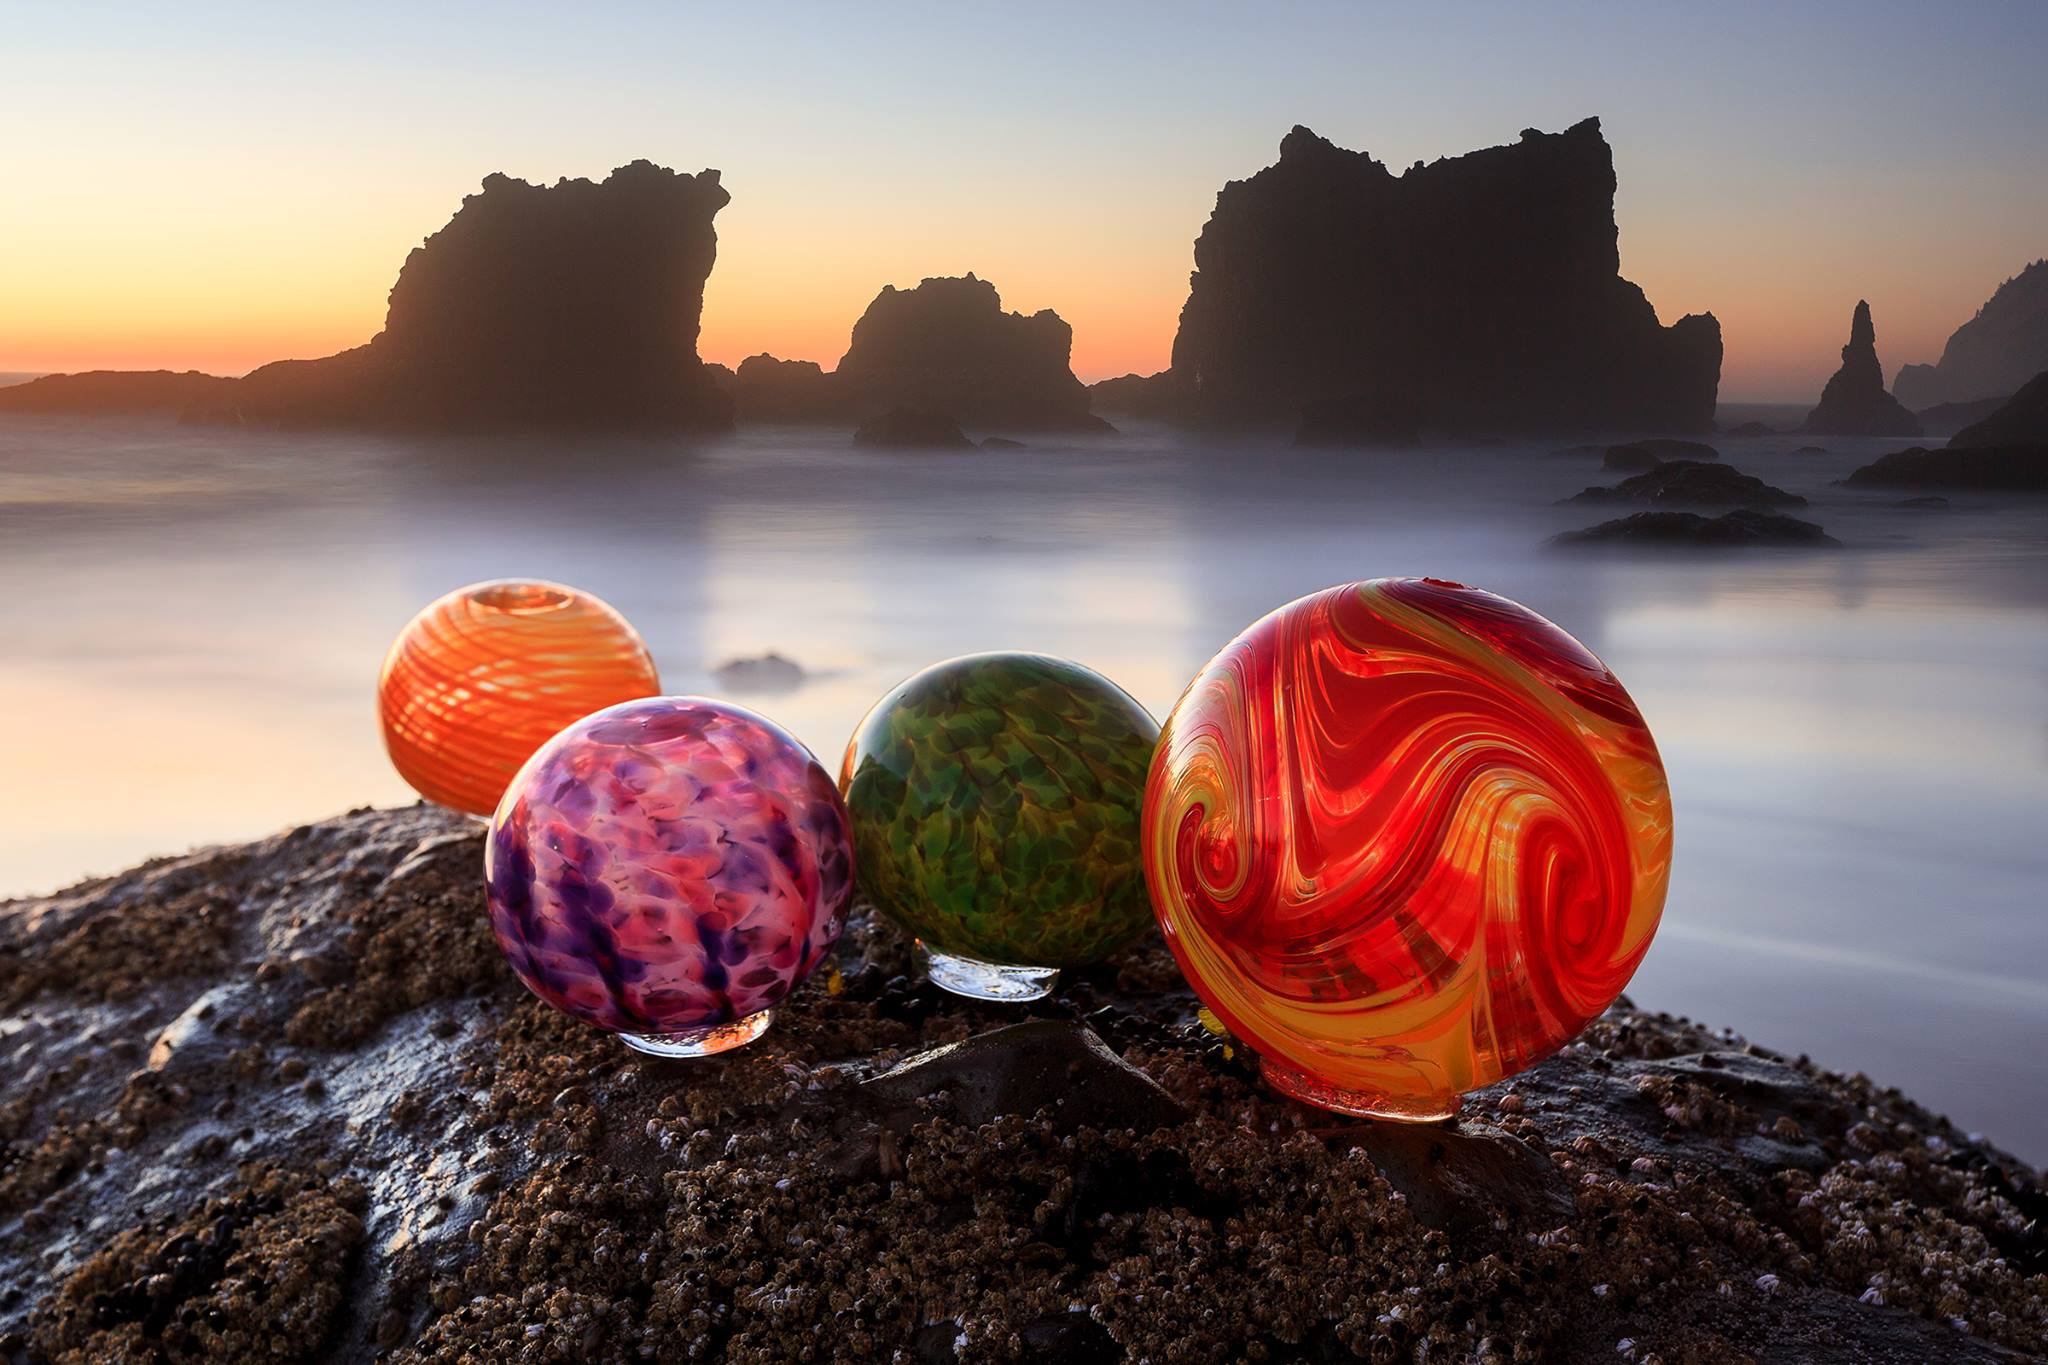 Finders Keepers to Drop 50 Glow-In-The-Dark Floats on Oregon Coast